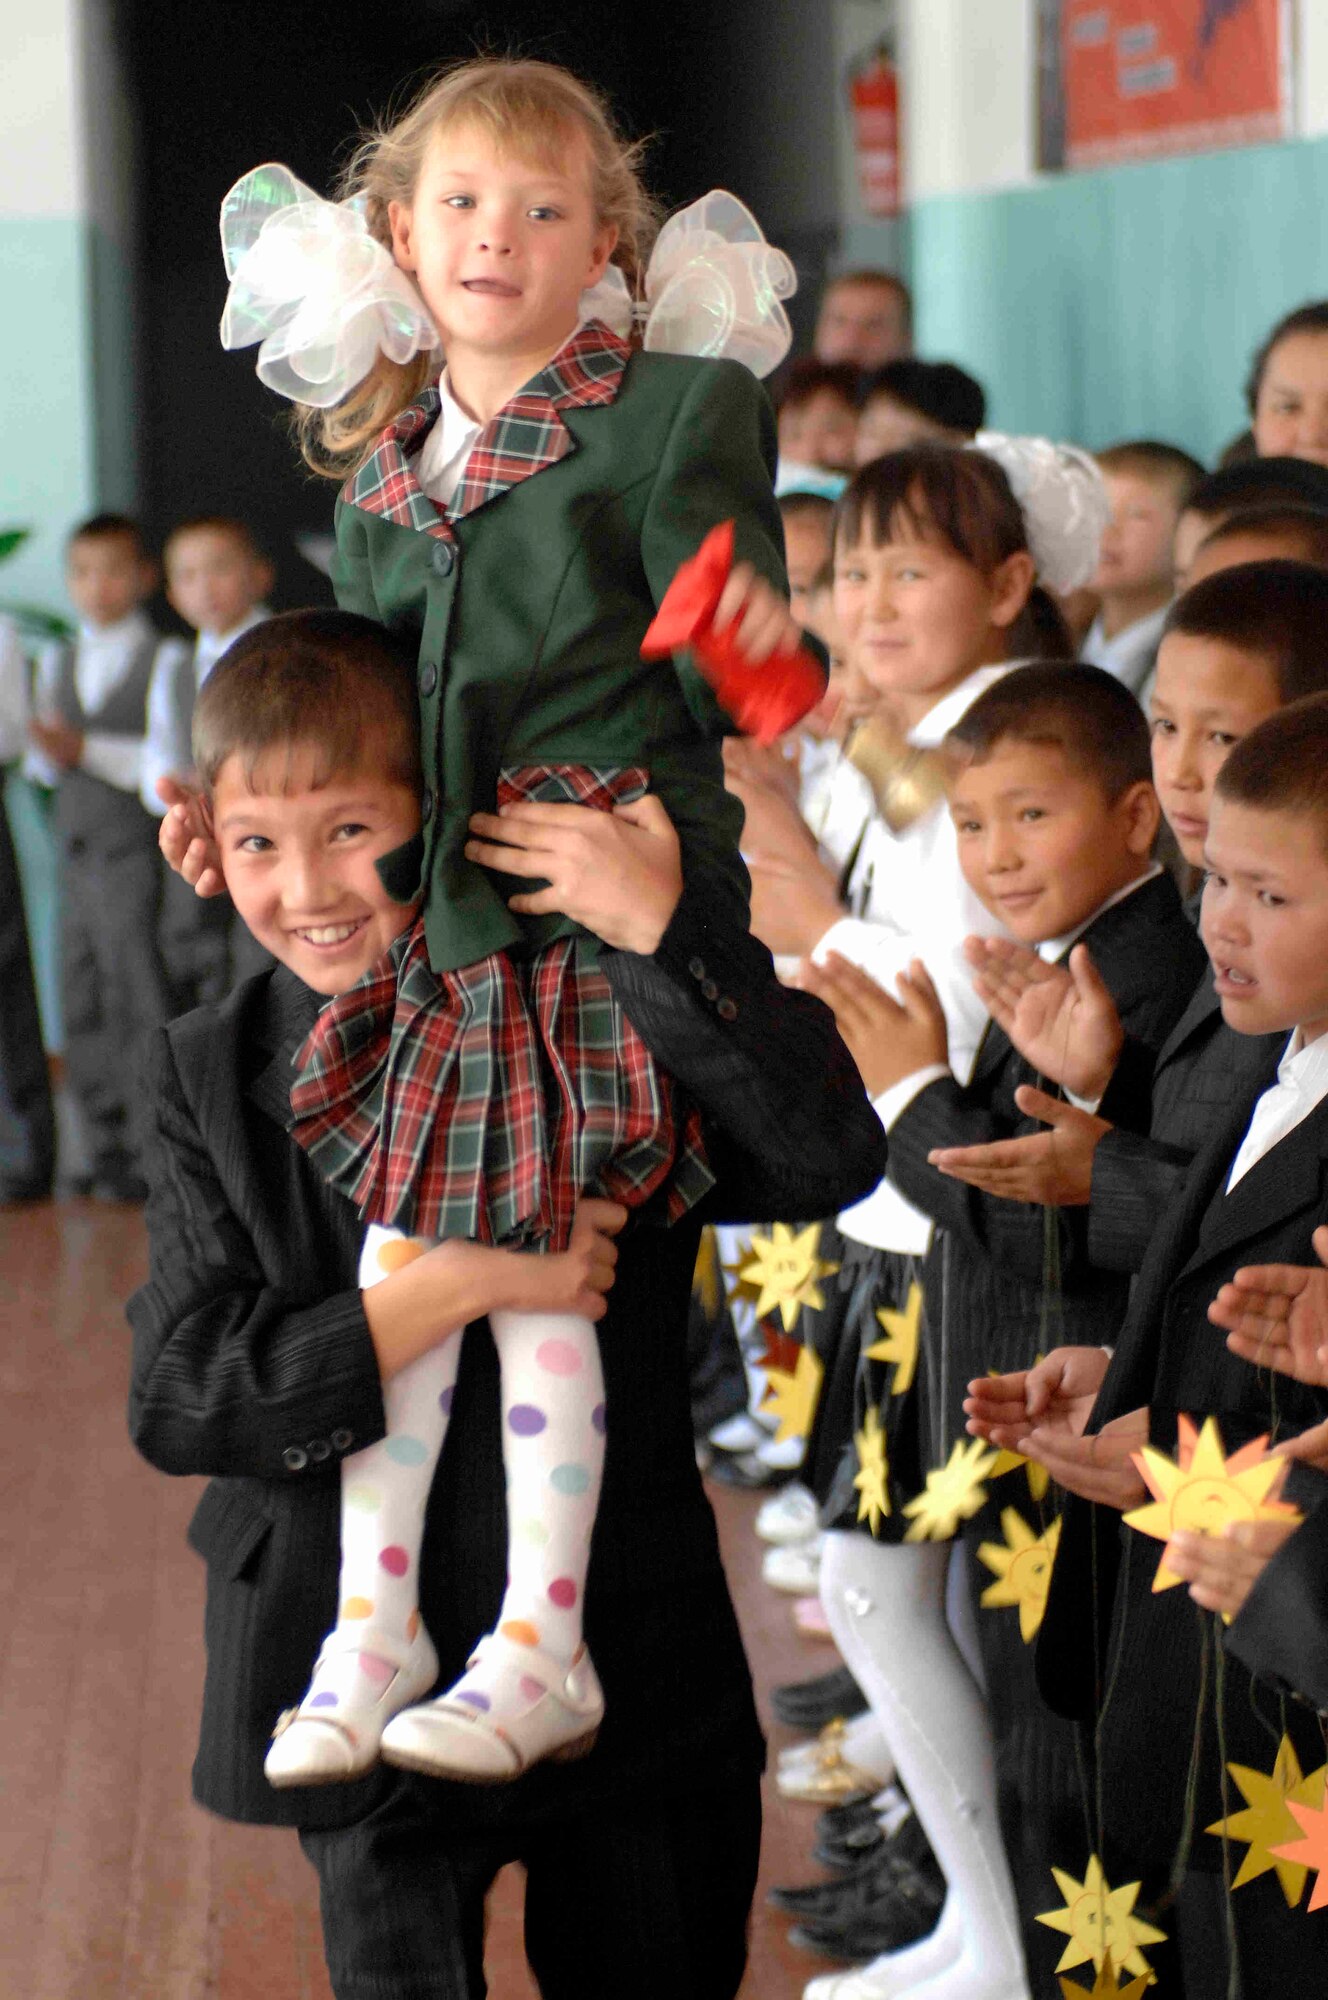 NIZHANCHUISK VILLAGE, Kyrgyzstan -- The youngest student rings a bell while carried by another student, at the Nizhanchuisk School, marking the start of the new school year, Sept. 8, 2009. Airmen from the Transit Center at Manas were invited to share in the ceremony of music and tradition marking the new school year. (U.S. Air Force photo/Senior Master Sgt. Andrew Lynch)